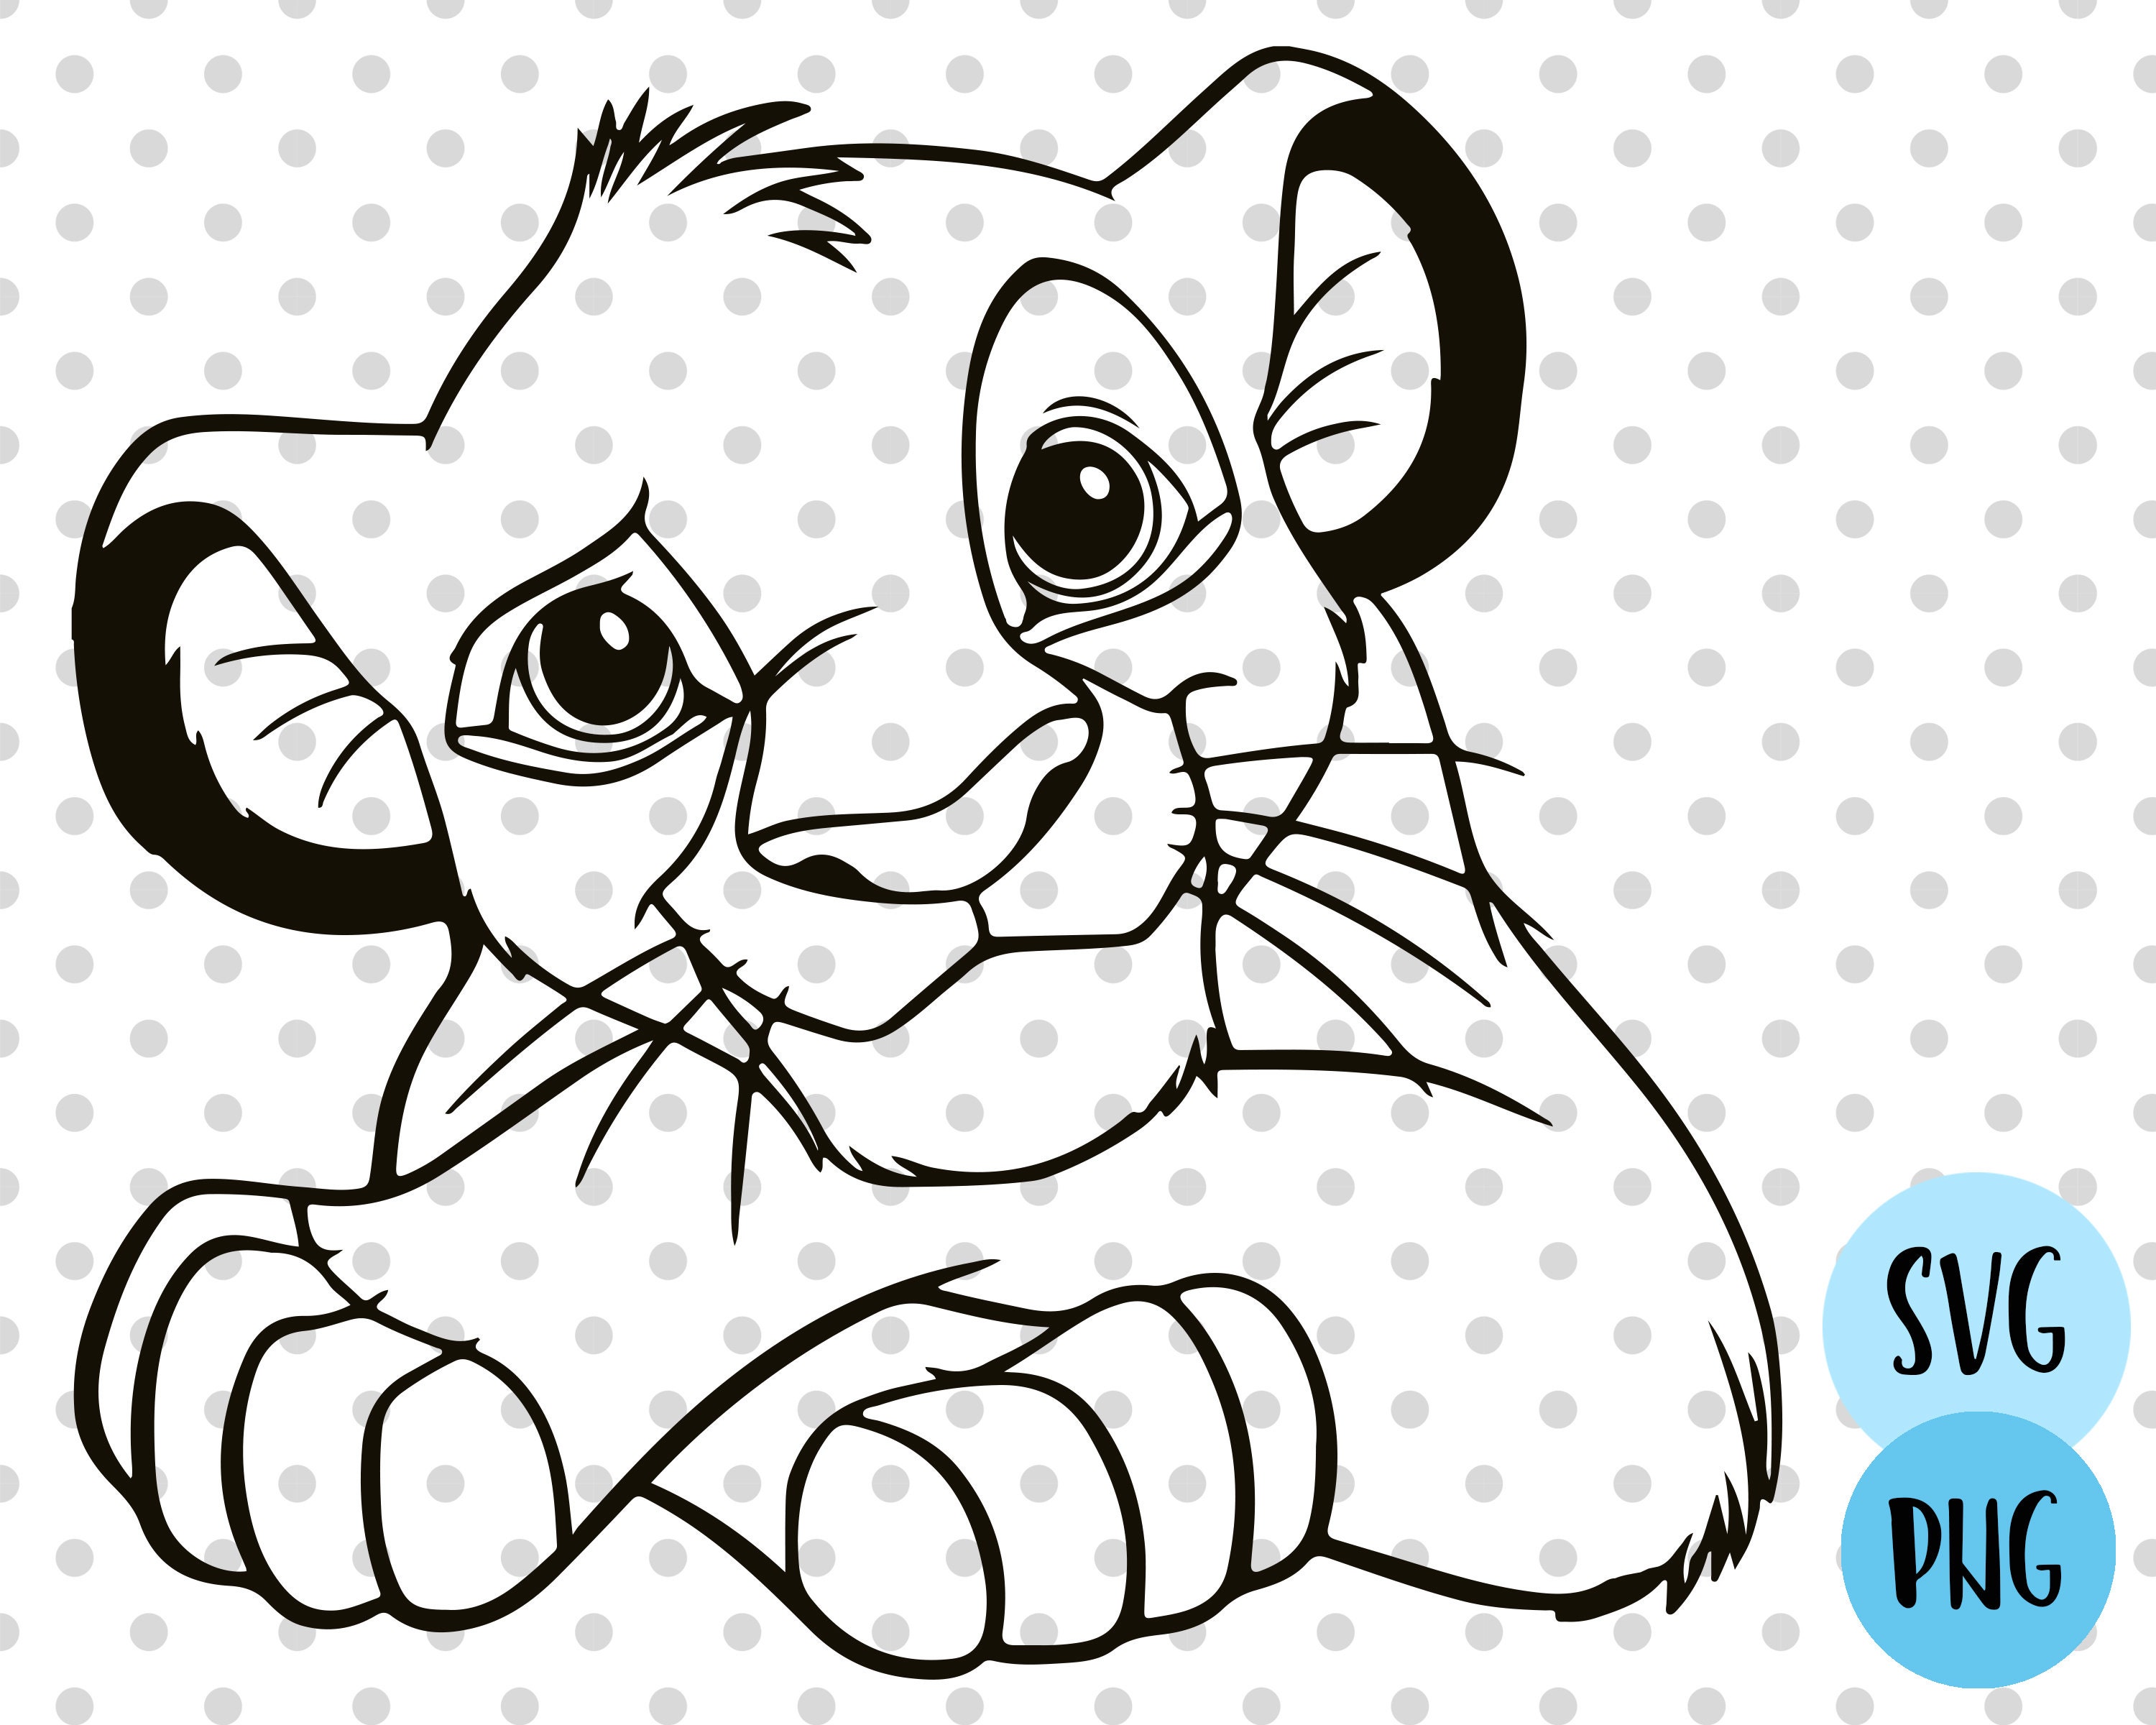 Simba SVG & PNG Clipart Files Lion King svg Simba Cutting | Etsy